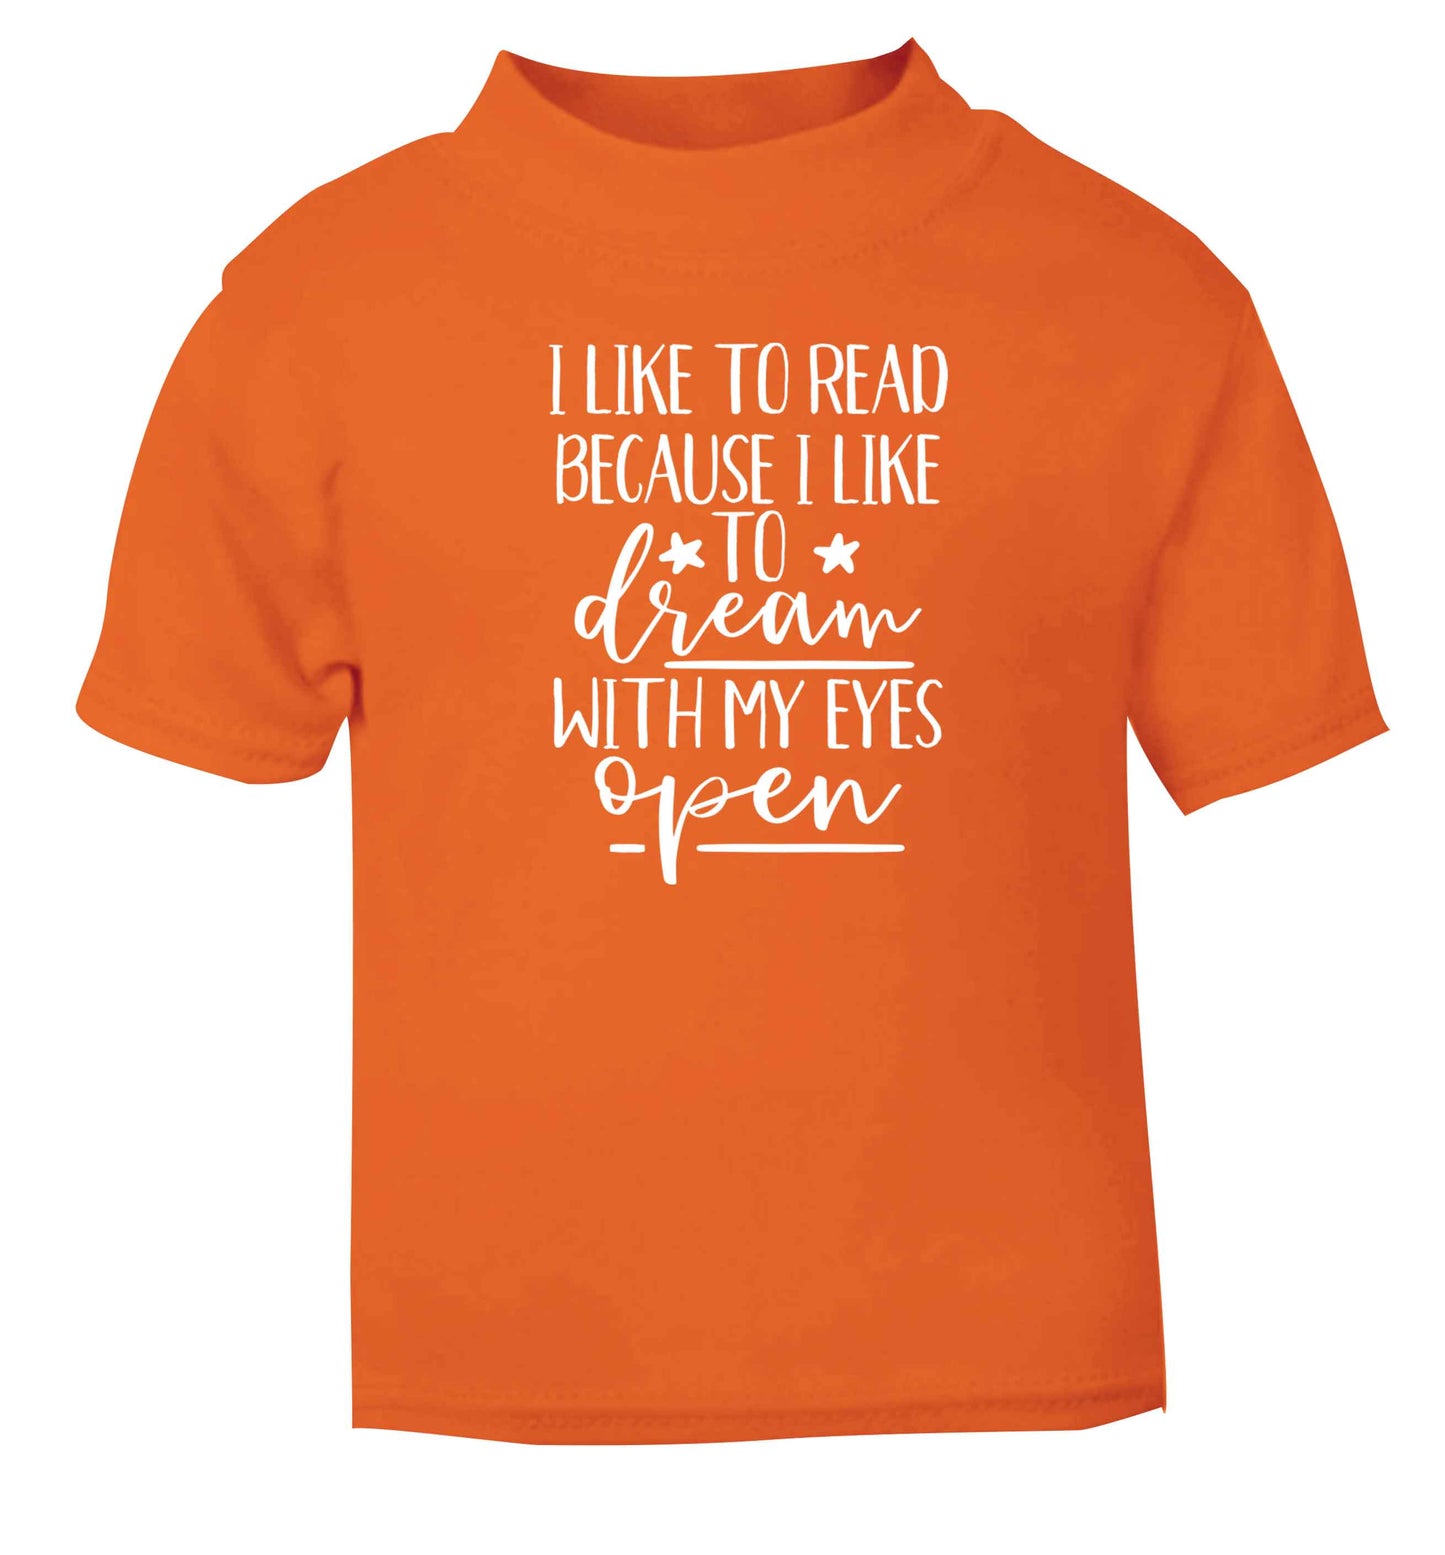 I like to read because I like to dream with my eyes open orange Baby Toddler Tshirt 2 Years